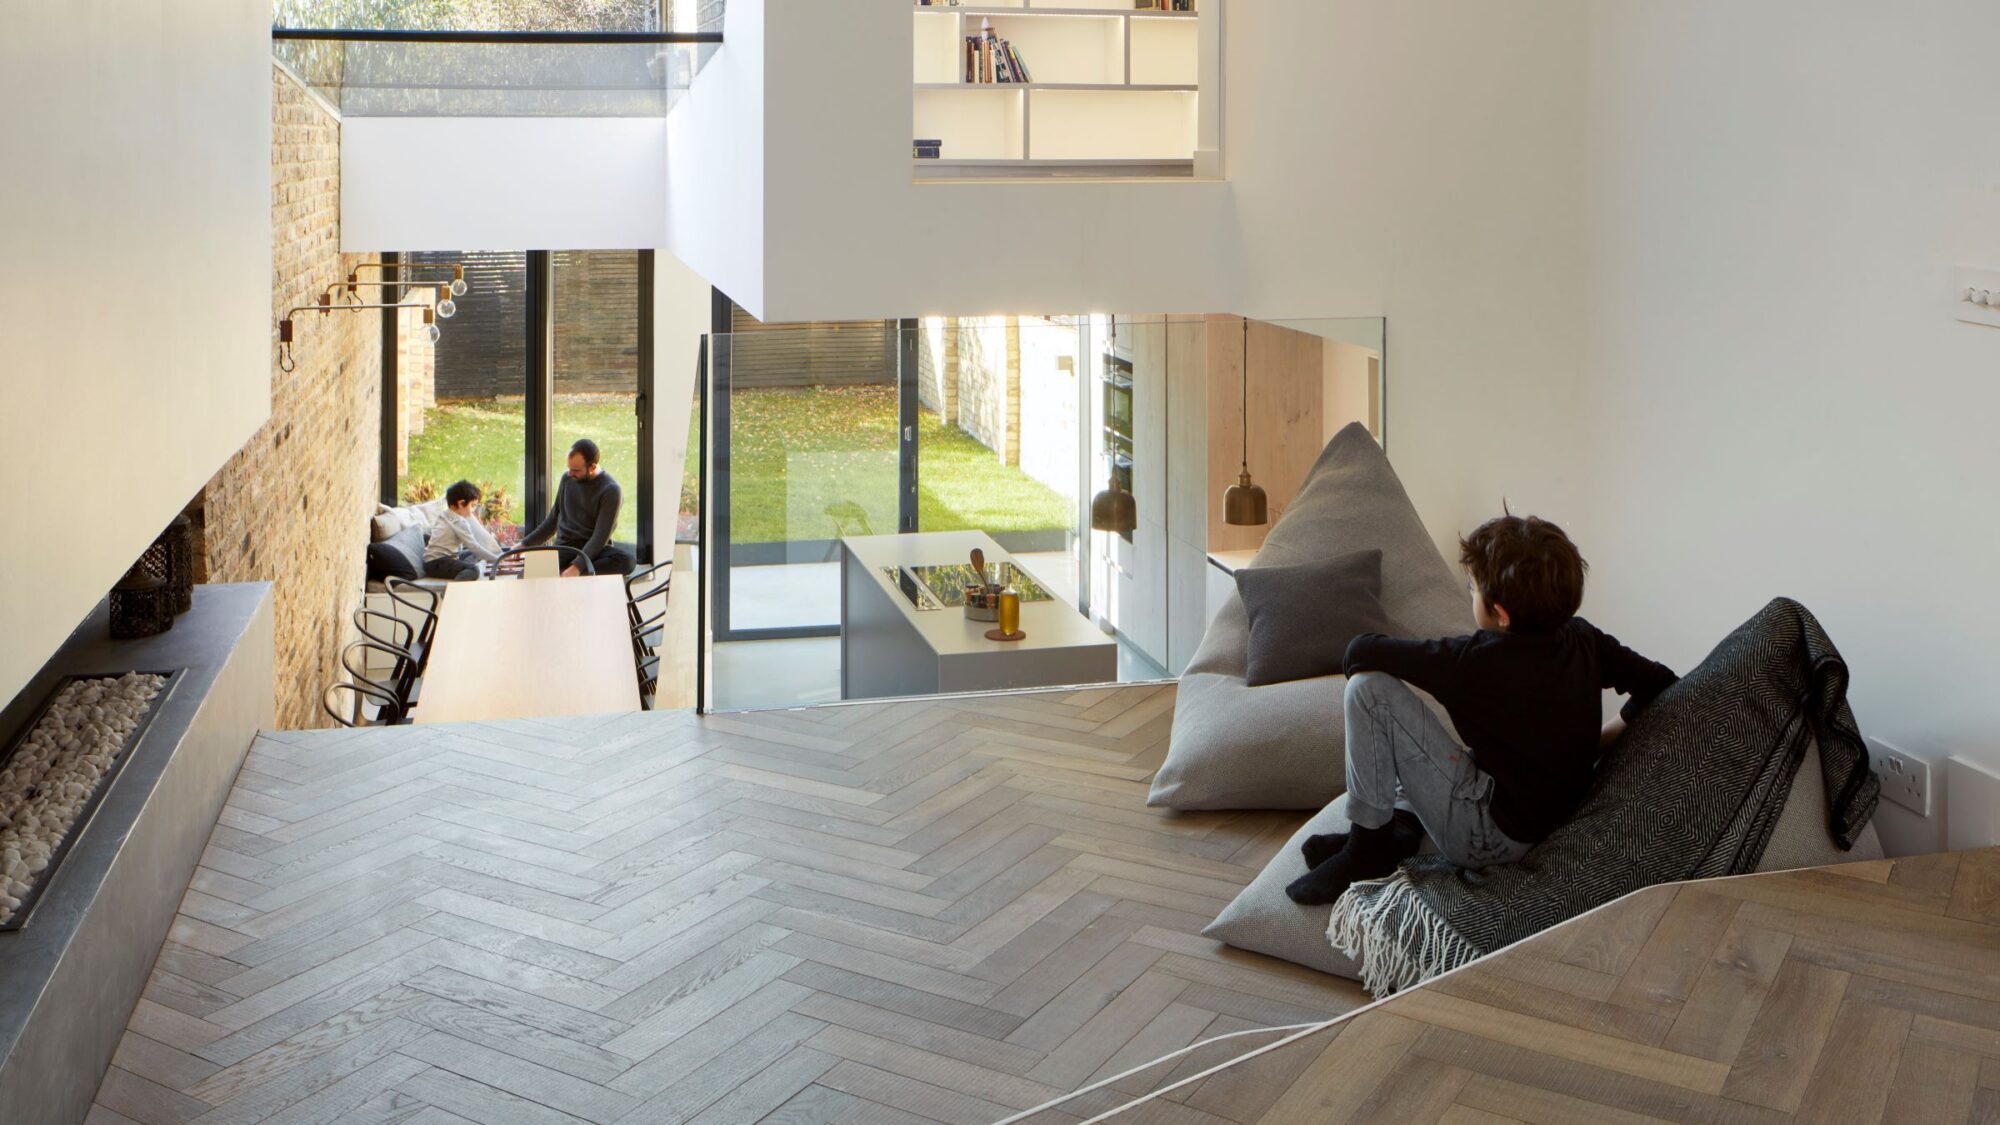 Tate bute herringbone floor with beanbag looking into kitchen by scenario architecture image by M Clayton 3